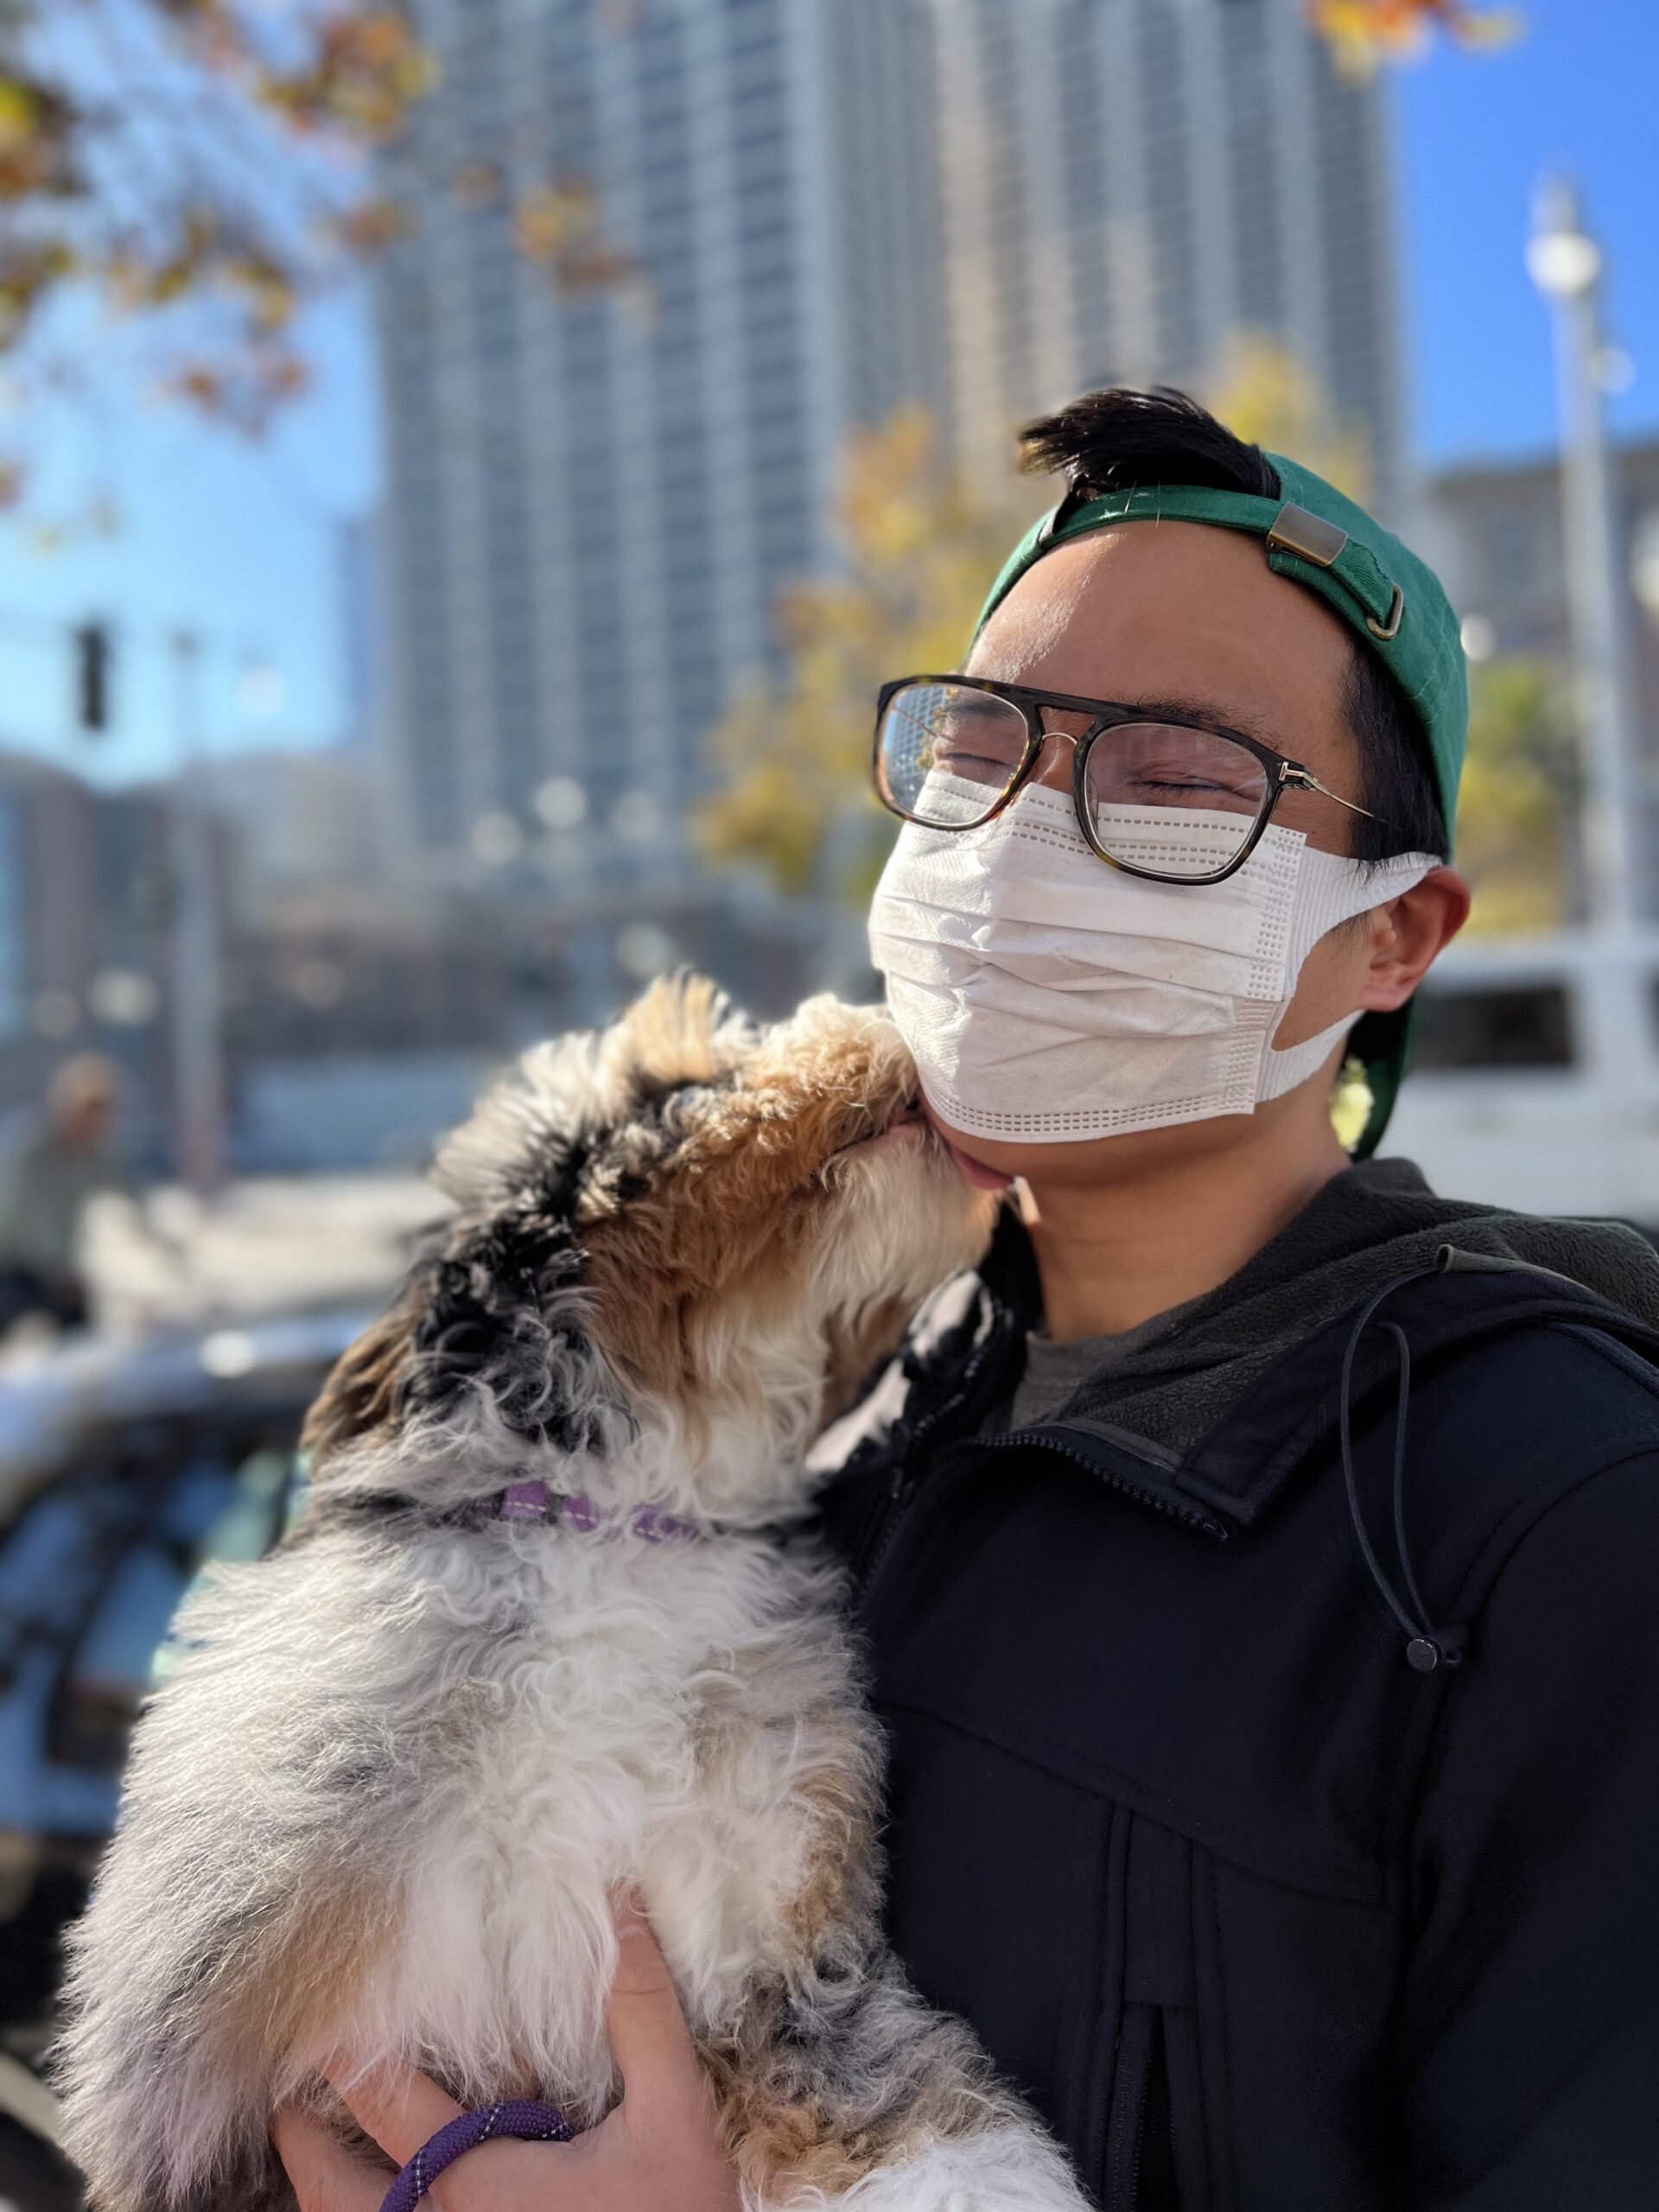 Man In Mask Holding Large Fluffy Bernese Mountain Dog Poodle Mix Puppy While She Licks His Face